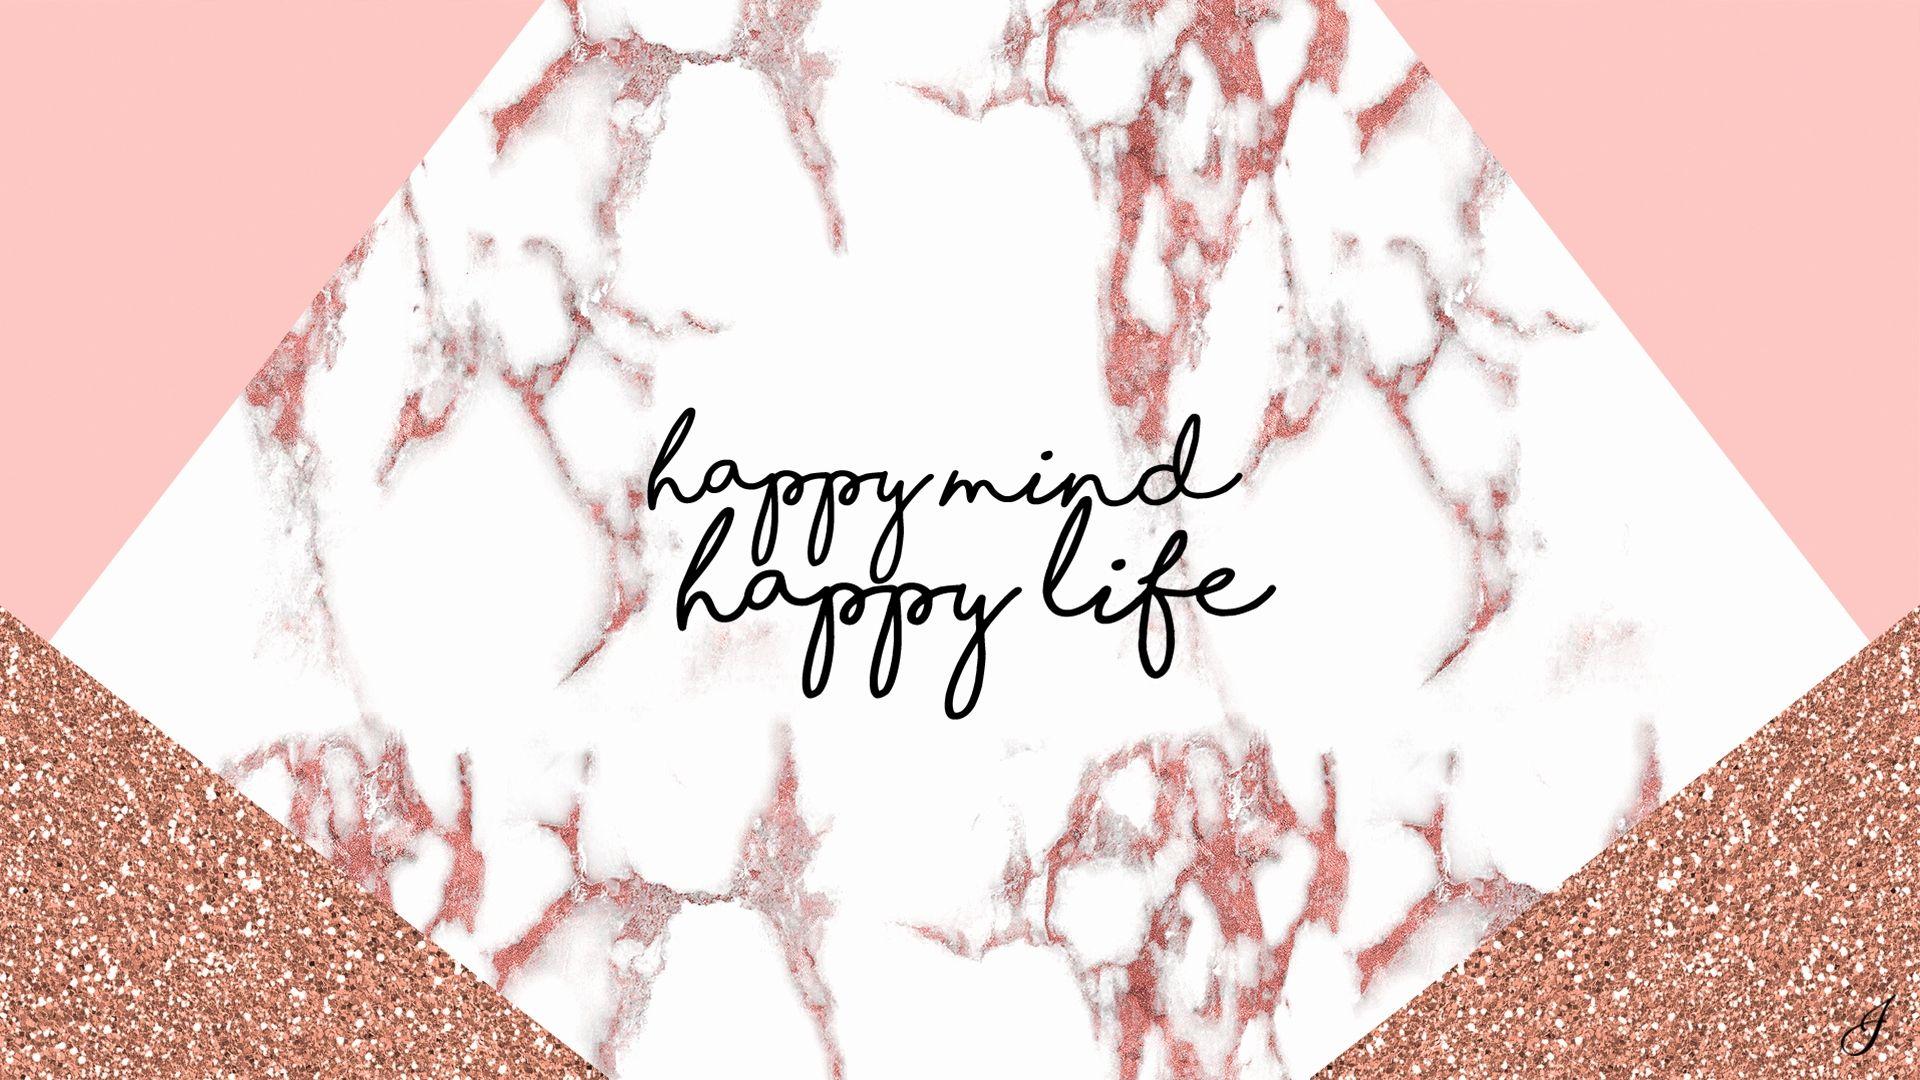 Rose Gold Tumblr Wallpapers Top Free Rose Gold Tumblr Backgrounds Wallpaperaccess If you want to know various other wallpaper, you could see our gallery on sidebar. rose gold tumblr wallpapers top free